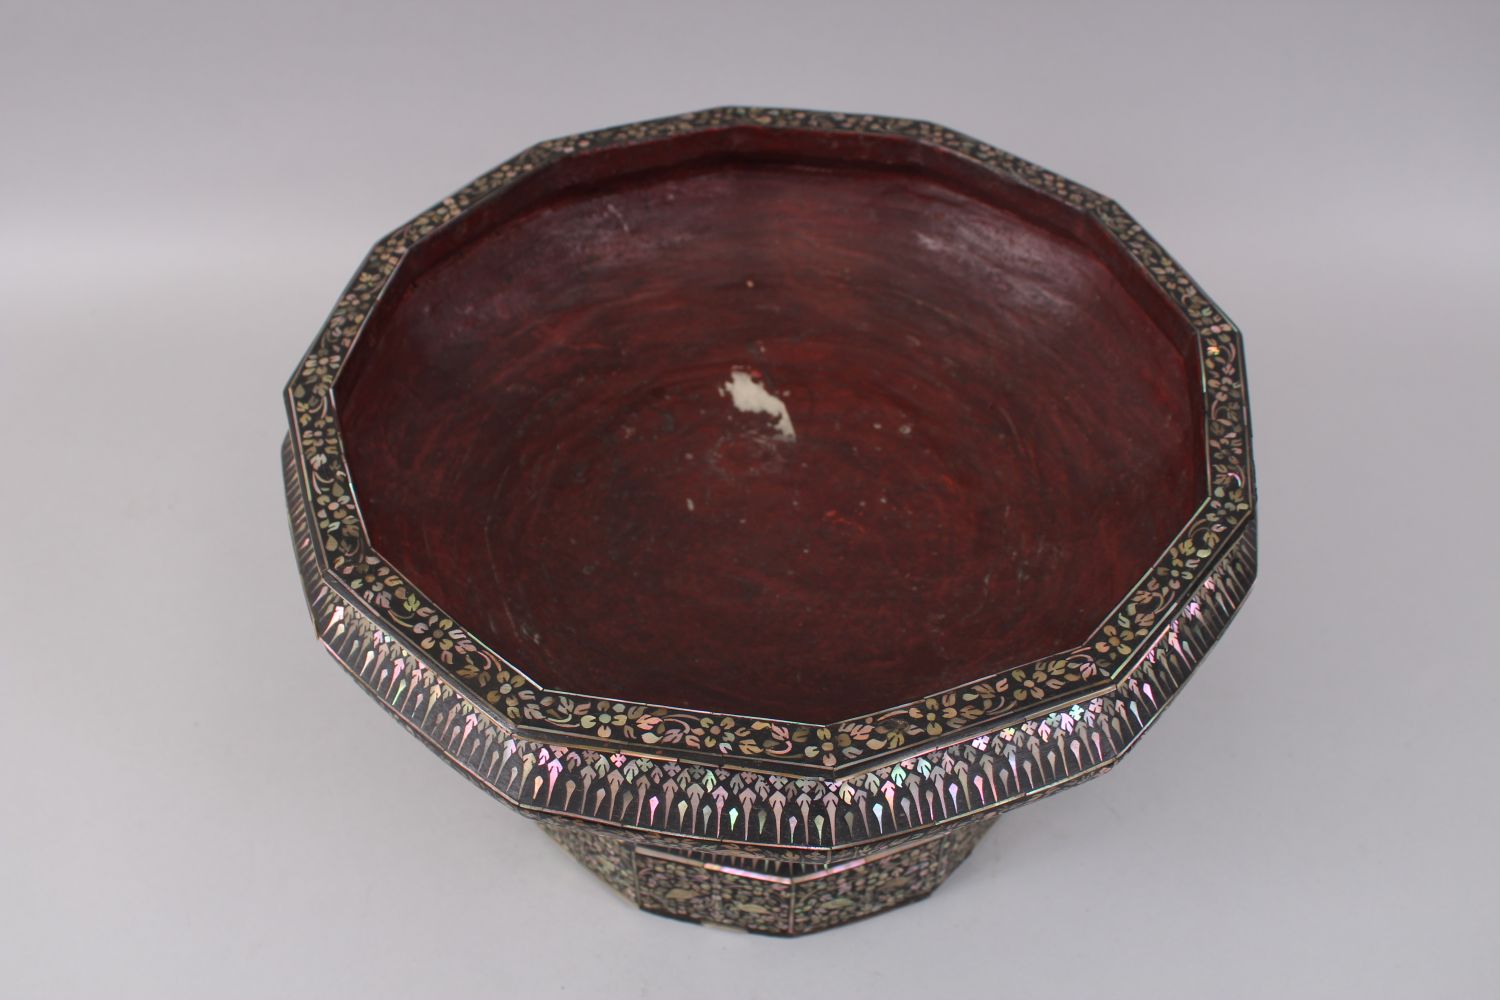 A LARGE 19TH CENTURY THAI MOTHER OF PEARL INLAID LACQUERED TWELVE SIDED PEDESTAL BOWL, 36cm diameter - Image 3 of 7